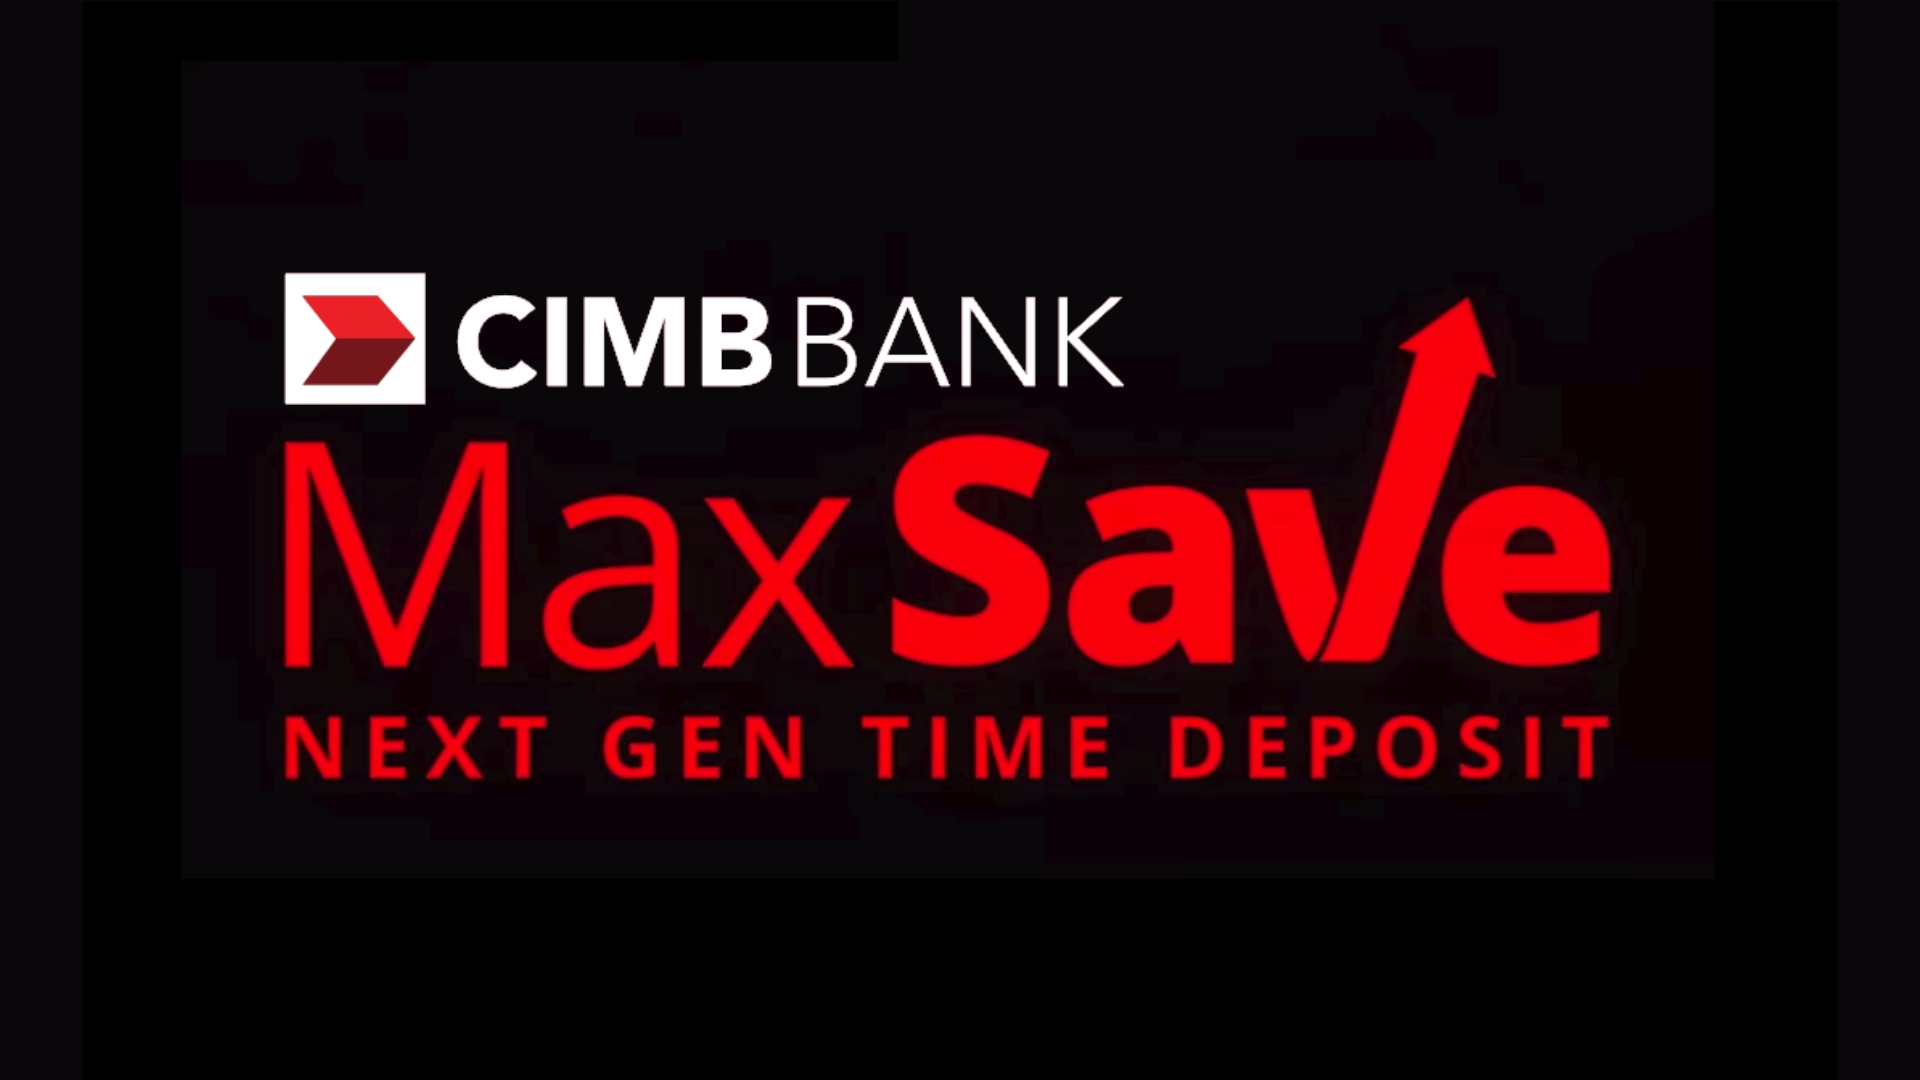 Up to 7.5% interest is available on CIMB Bank PH MaxSave Time Deposits annually.